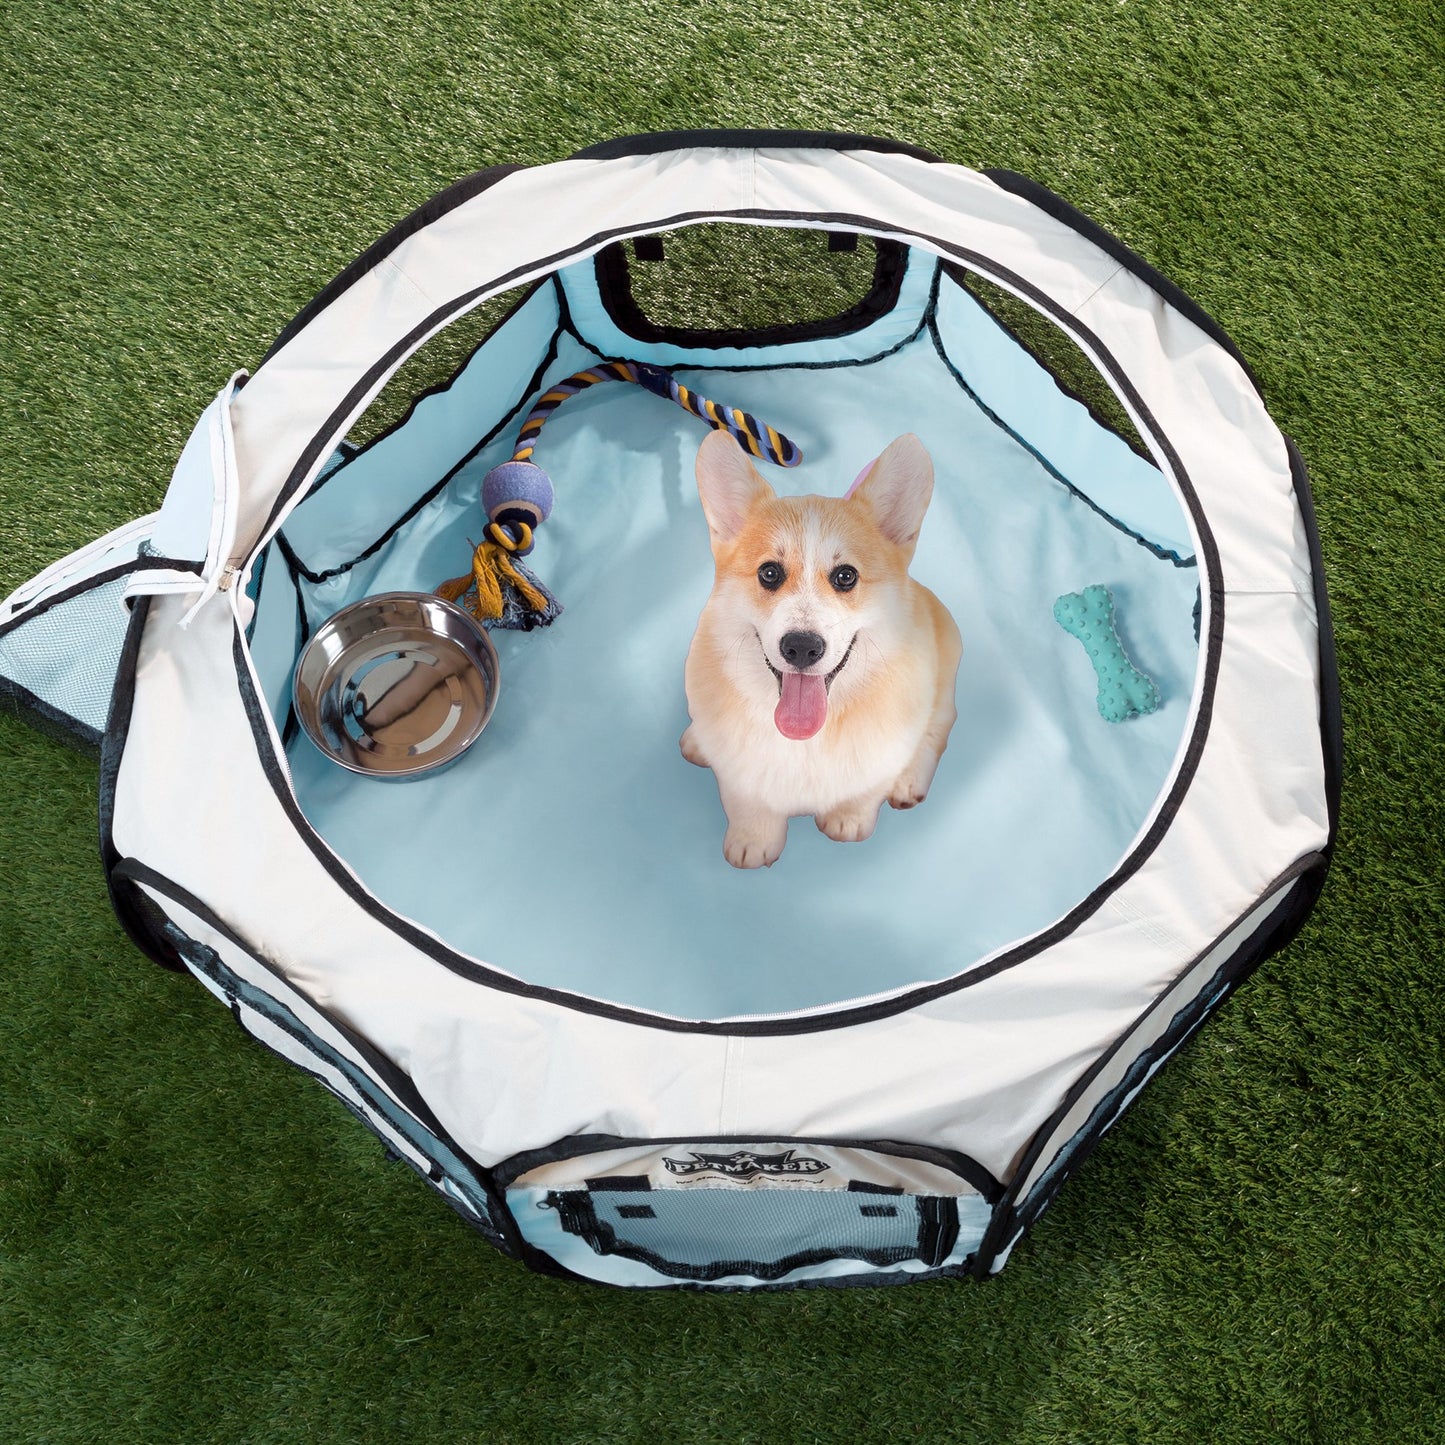 Pet Playpen - 33x15 Pop-Up Dog Kennel with Carry Bag - Portable Play Pen for Dogs, Cats, Rabbits, and Small Animals up to 25lbs by PETMAKER (Blue)